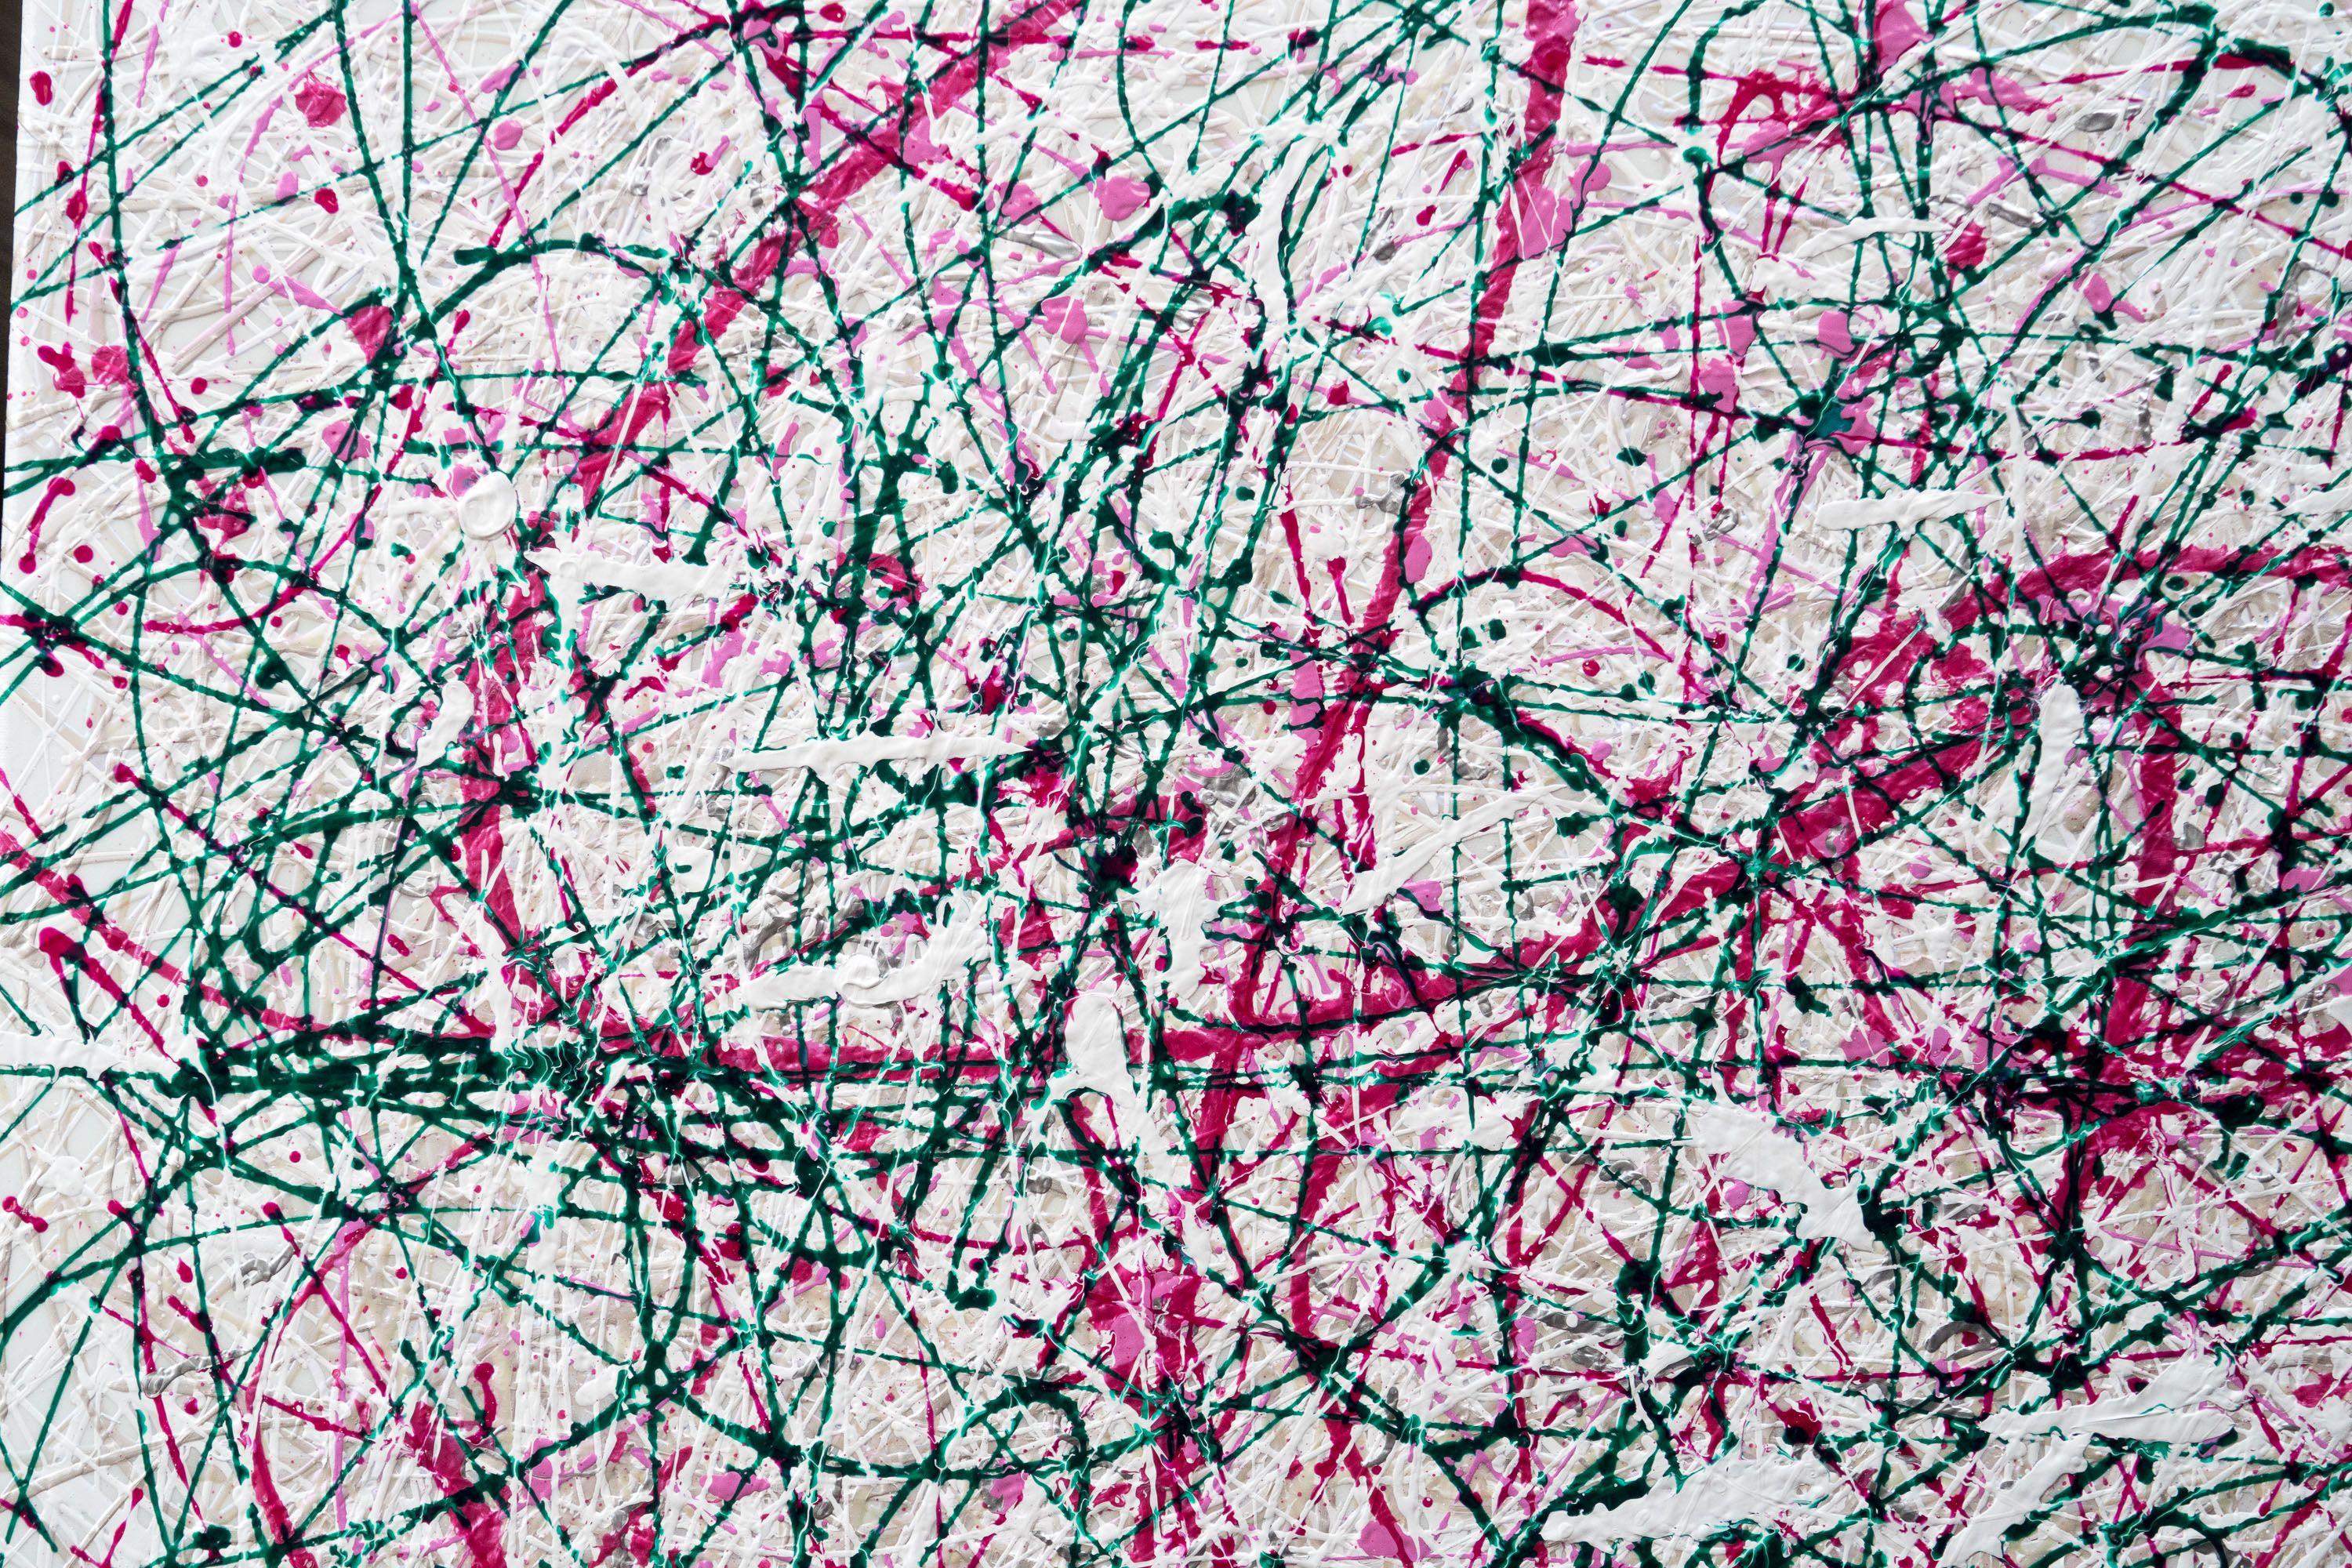 Action painting. 50in x 34in approx  This painting is delivered rolled.  This cerise, white and green painting would make a stunning focal point for any room. It is full of energy.  This canvas is heavy with paint and would be best glued to a